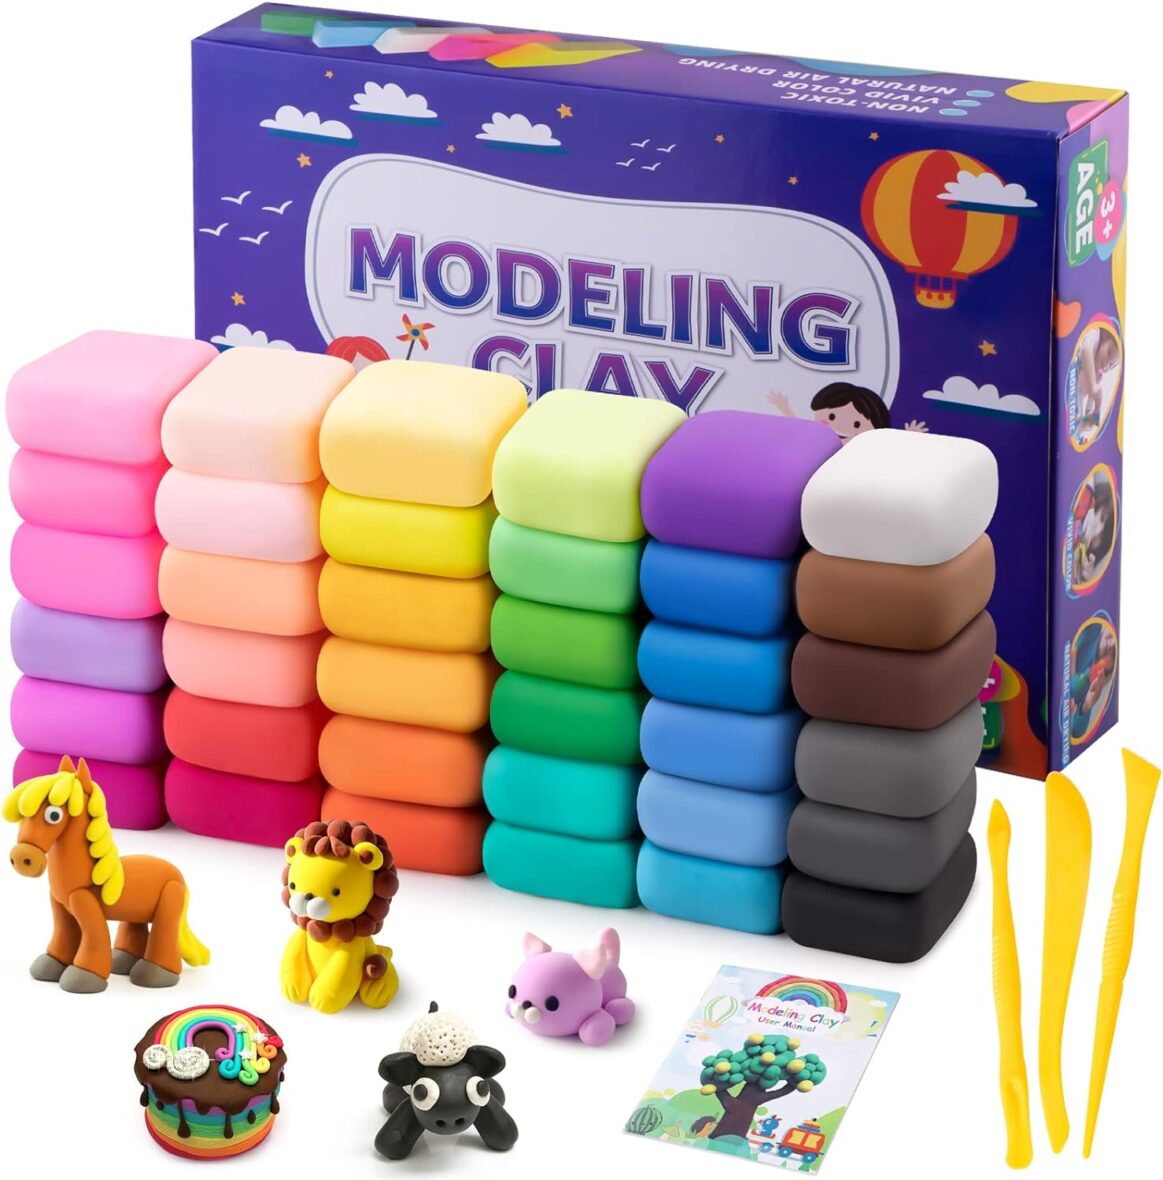 Air Dry Clay, 36 Colors Modeling Clay Kit with 3 Sculpting Tools, Magic Foam Clay for Kids and Adults, DIY Molding Clay Gift for Boys and Girls